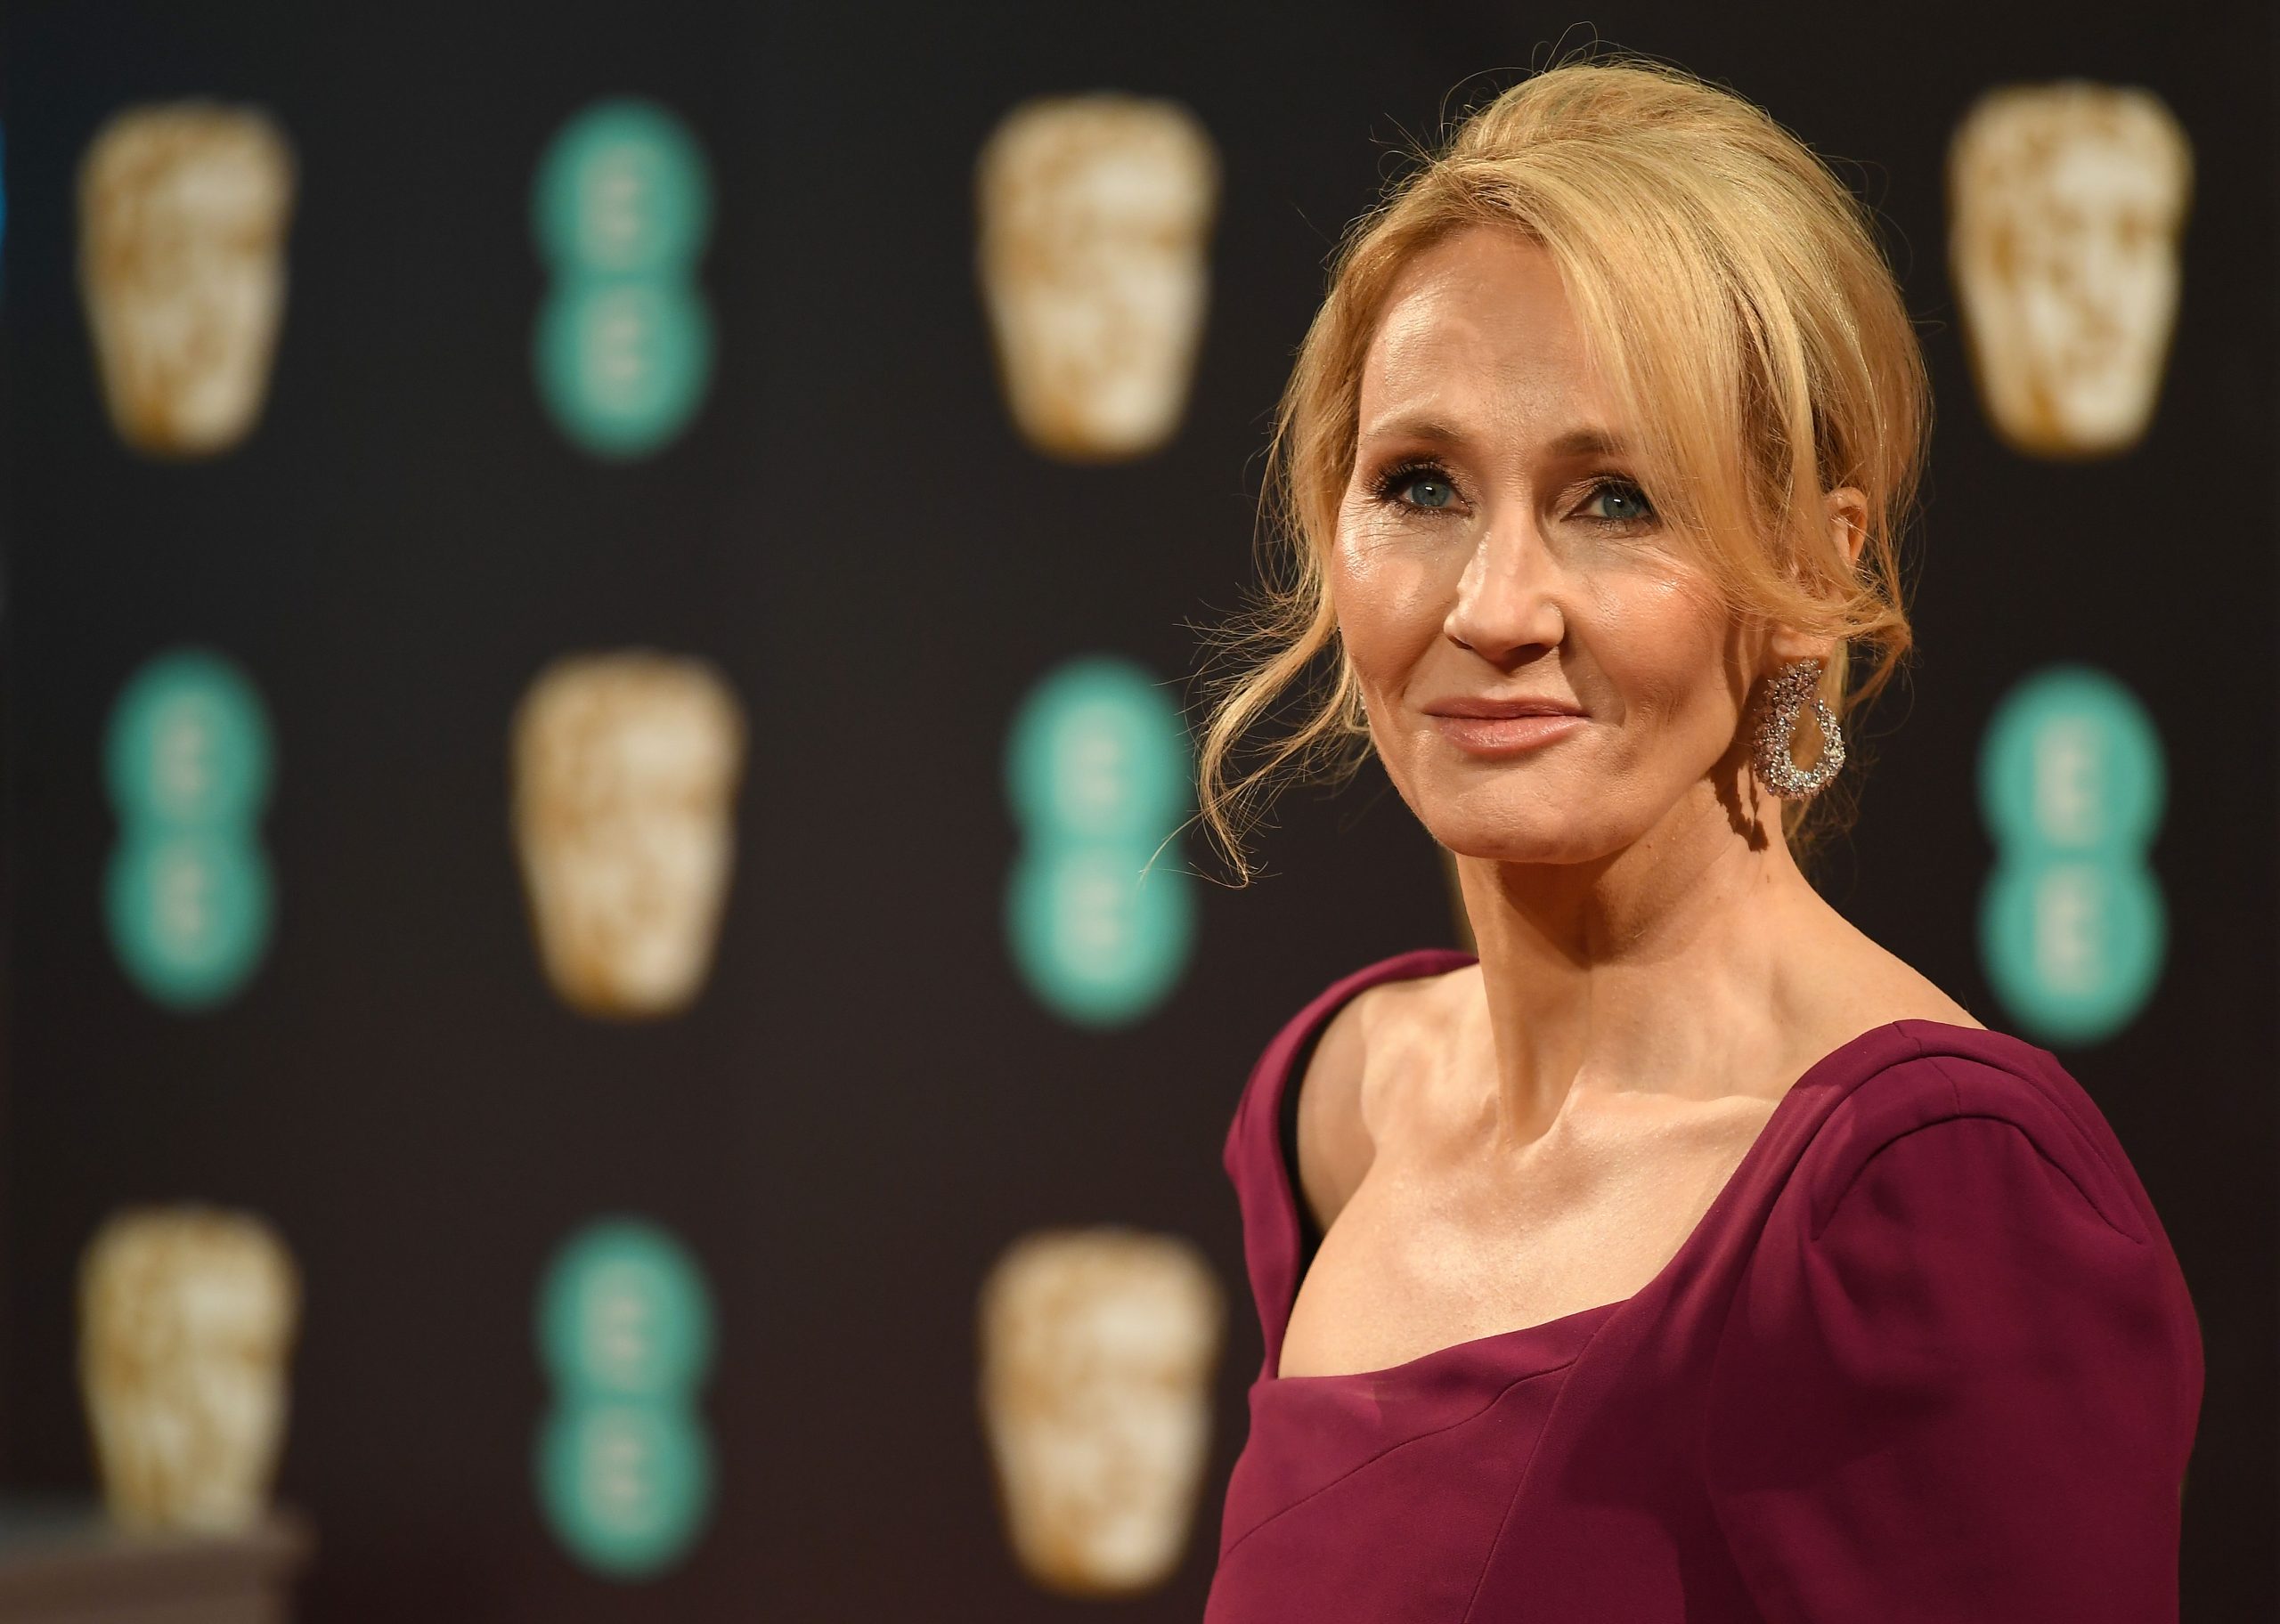 JK Rowling to launch new children’s book in October